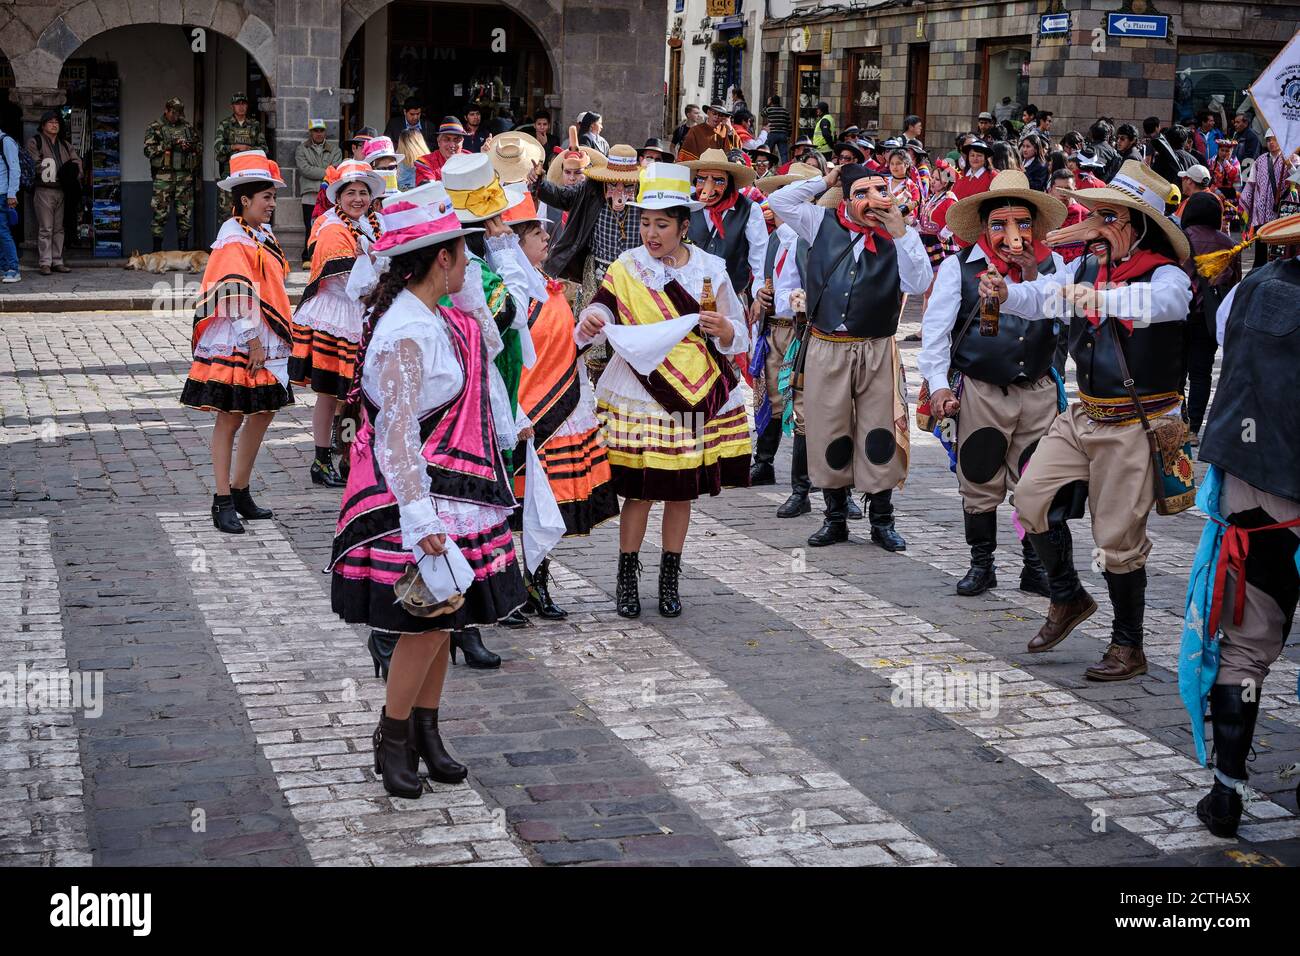 Men and women in costume, waiting to join their procession during the Inti Raymi'rata sun festival over the winter solstice, Cusco, Peru Stock Photo